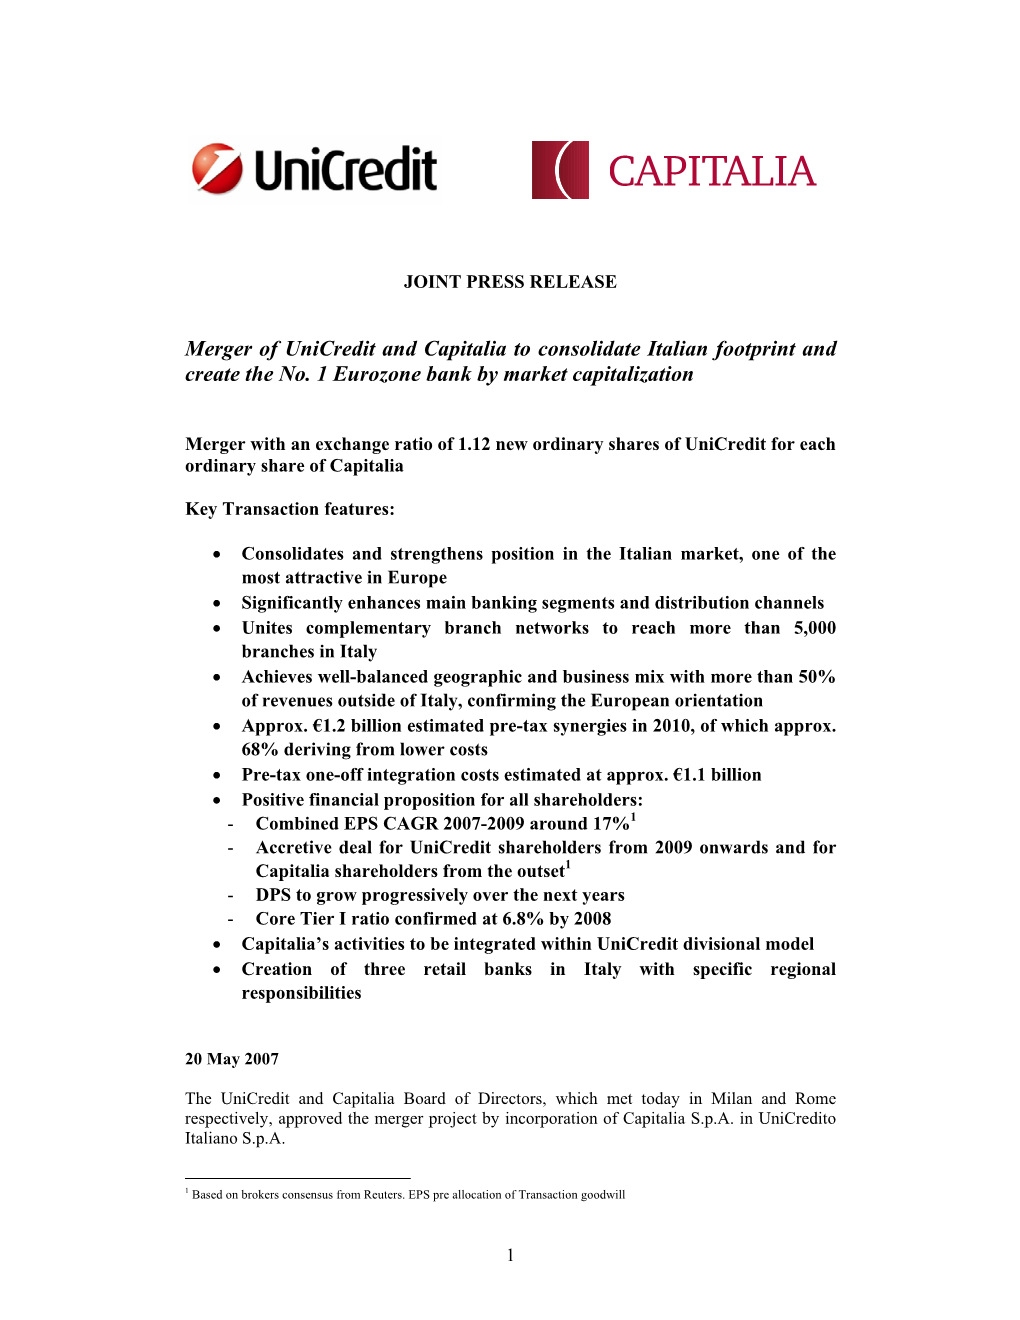 Merger of Unicredit and Capitalia to Consolidate Italian Footprint and Create the No